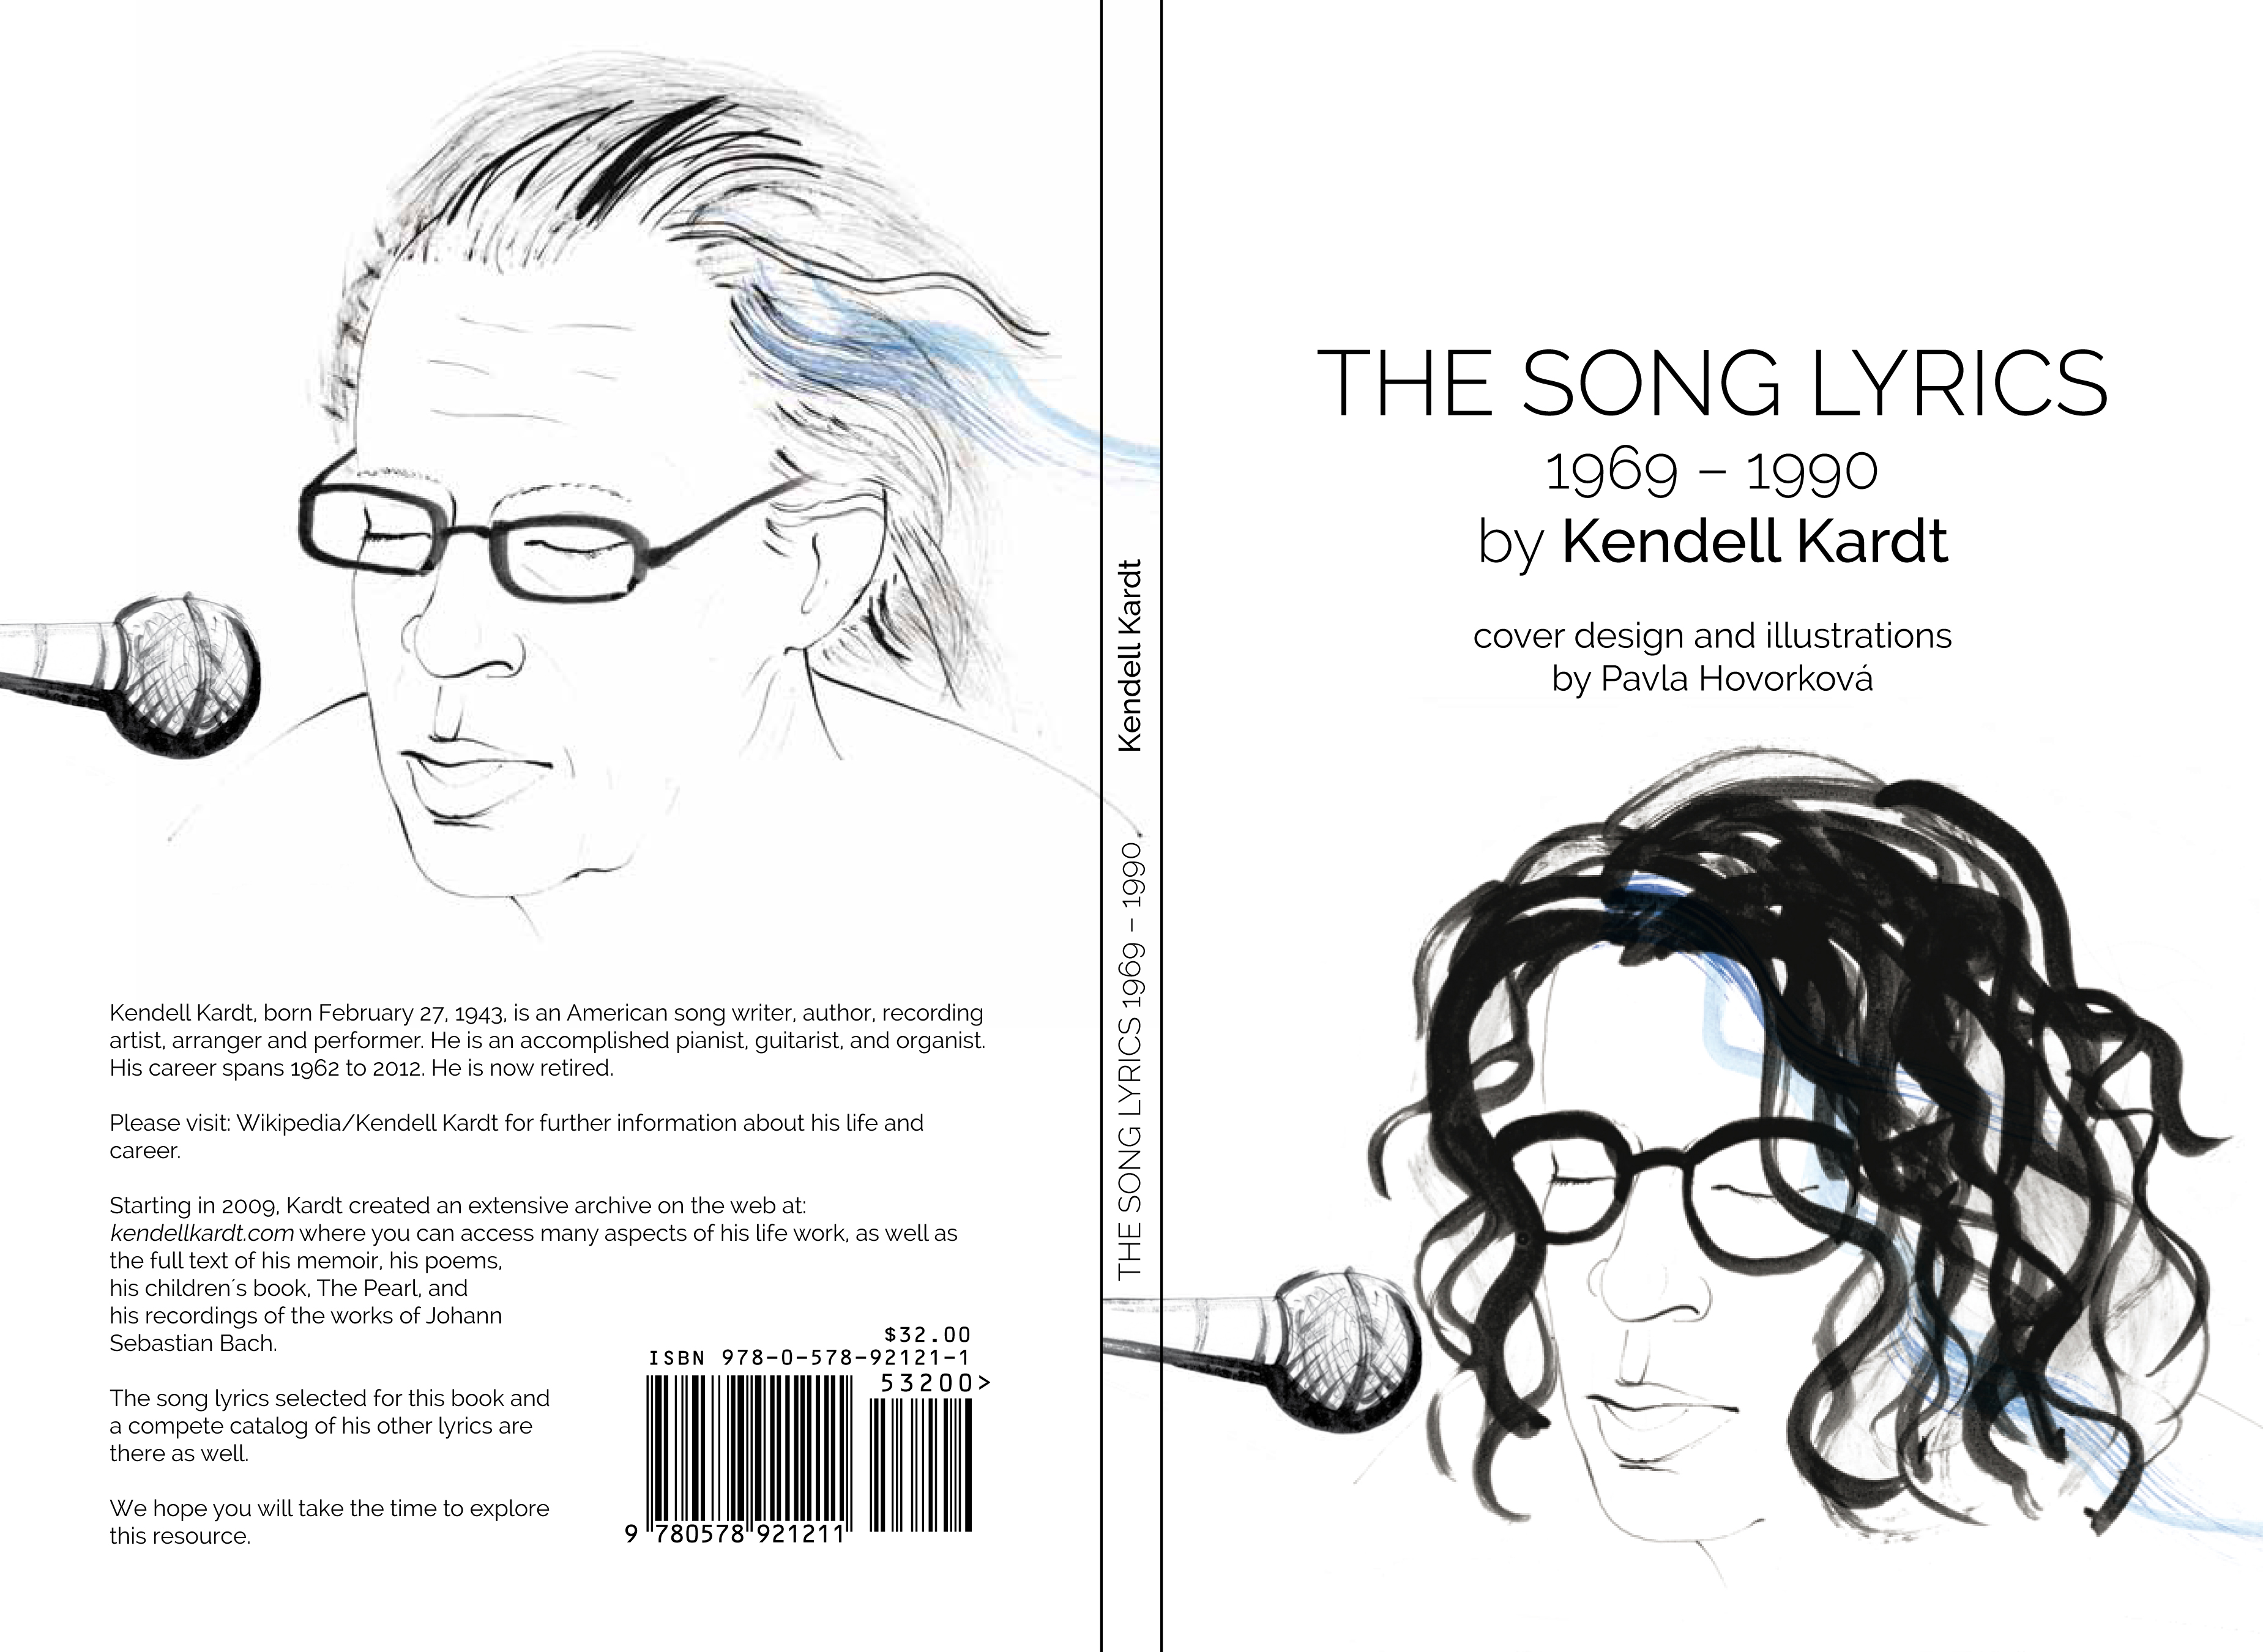 Lyric-book_6x9inches_2021_cover-spine_preview2.jpg